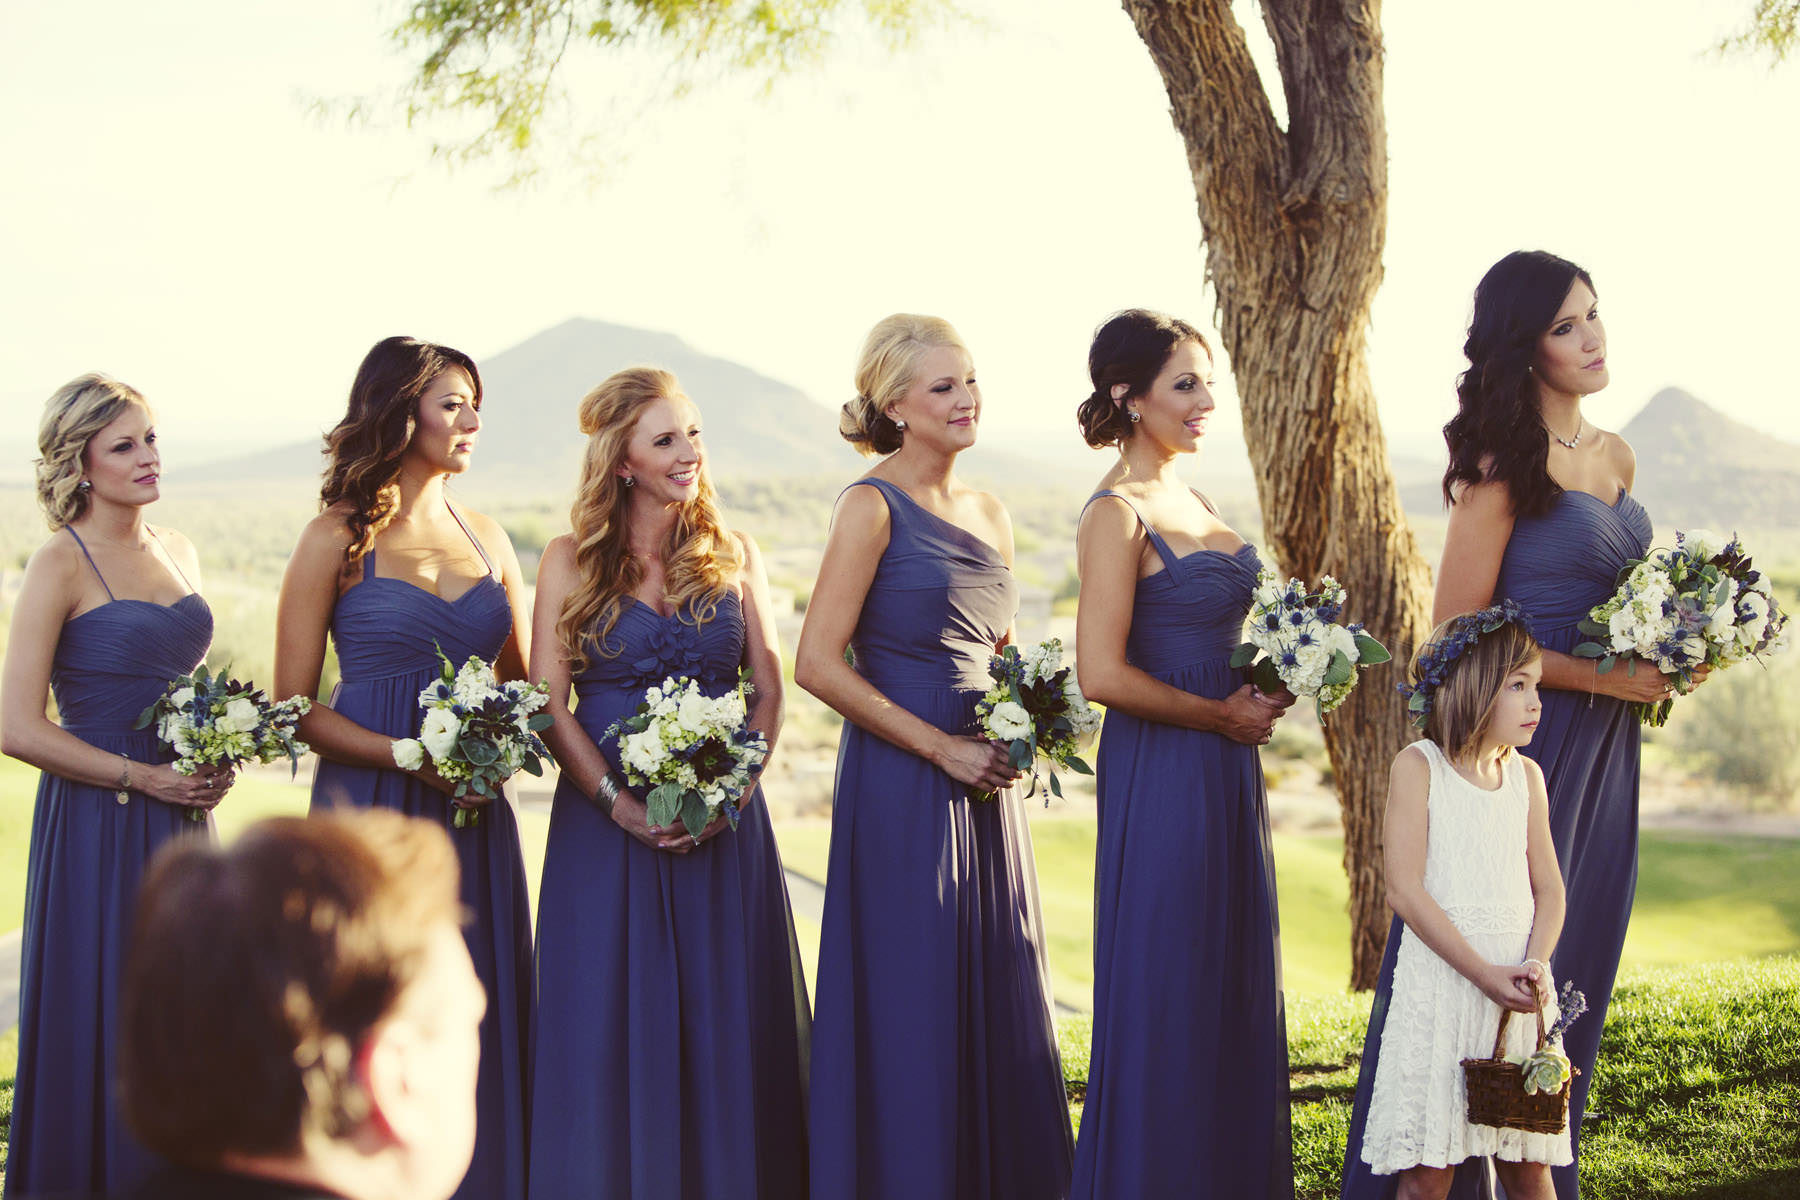 Fountain Hills Wedding ~ Continued….